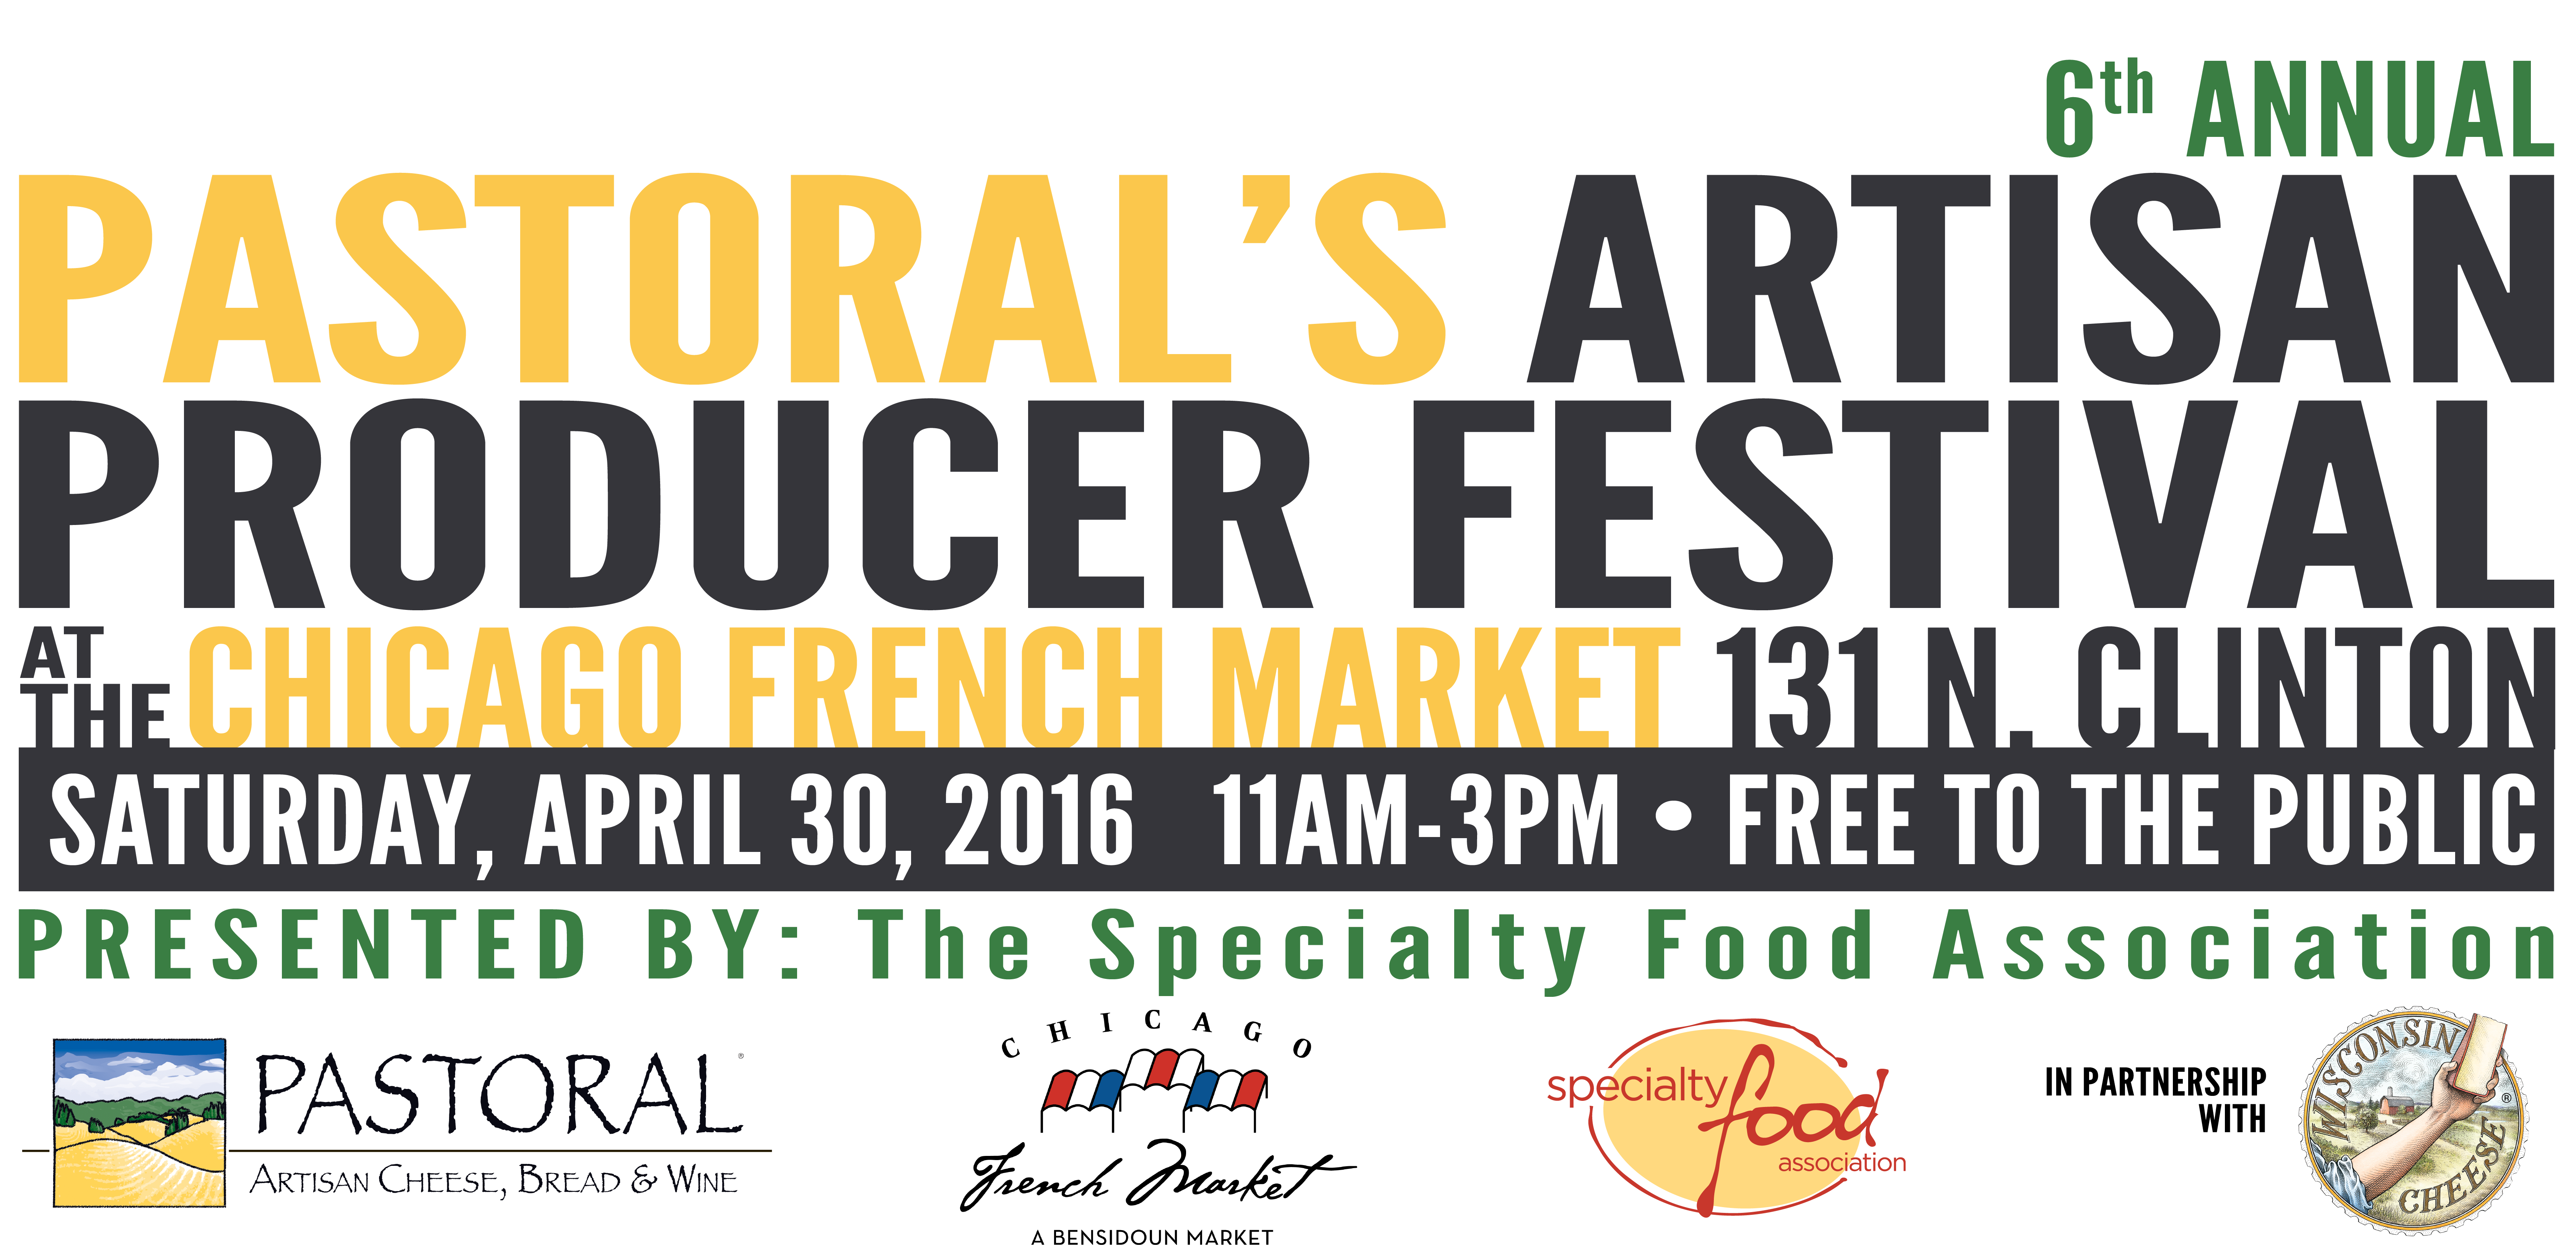 Pastoral’s Artisan Producer Festival welcomes nearly 100 artisan producers and vendors of high-quality food and beverages on Saturday, April 30th from 11:00am – 3:00pm at Chicago French Market.